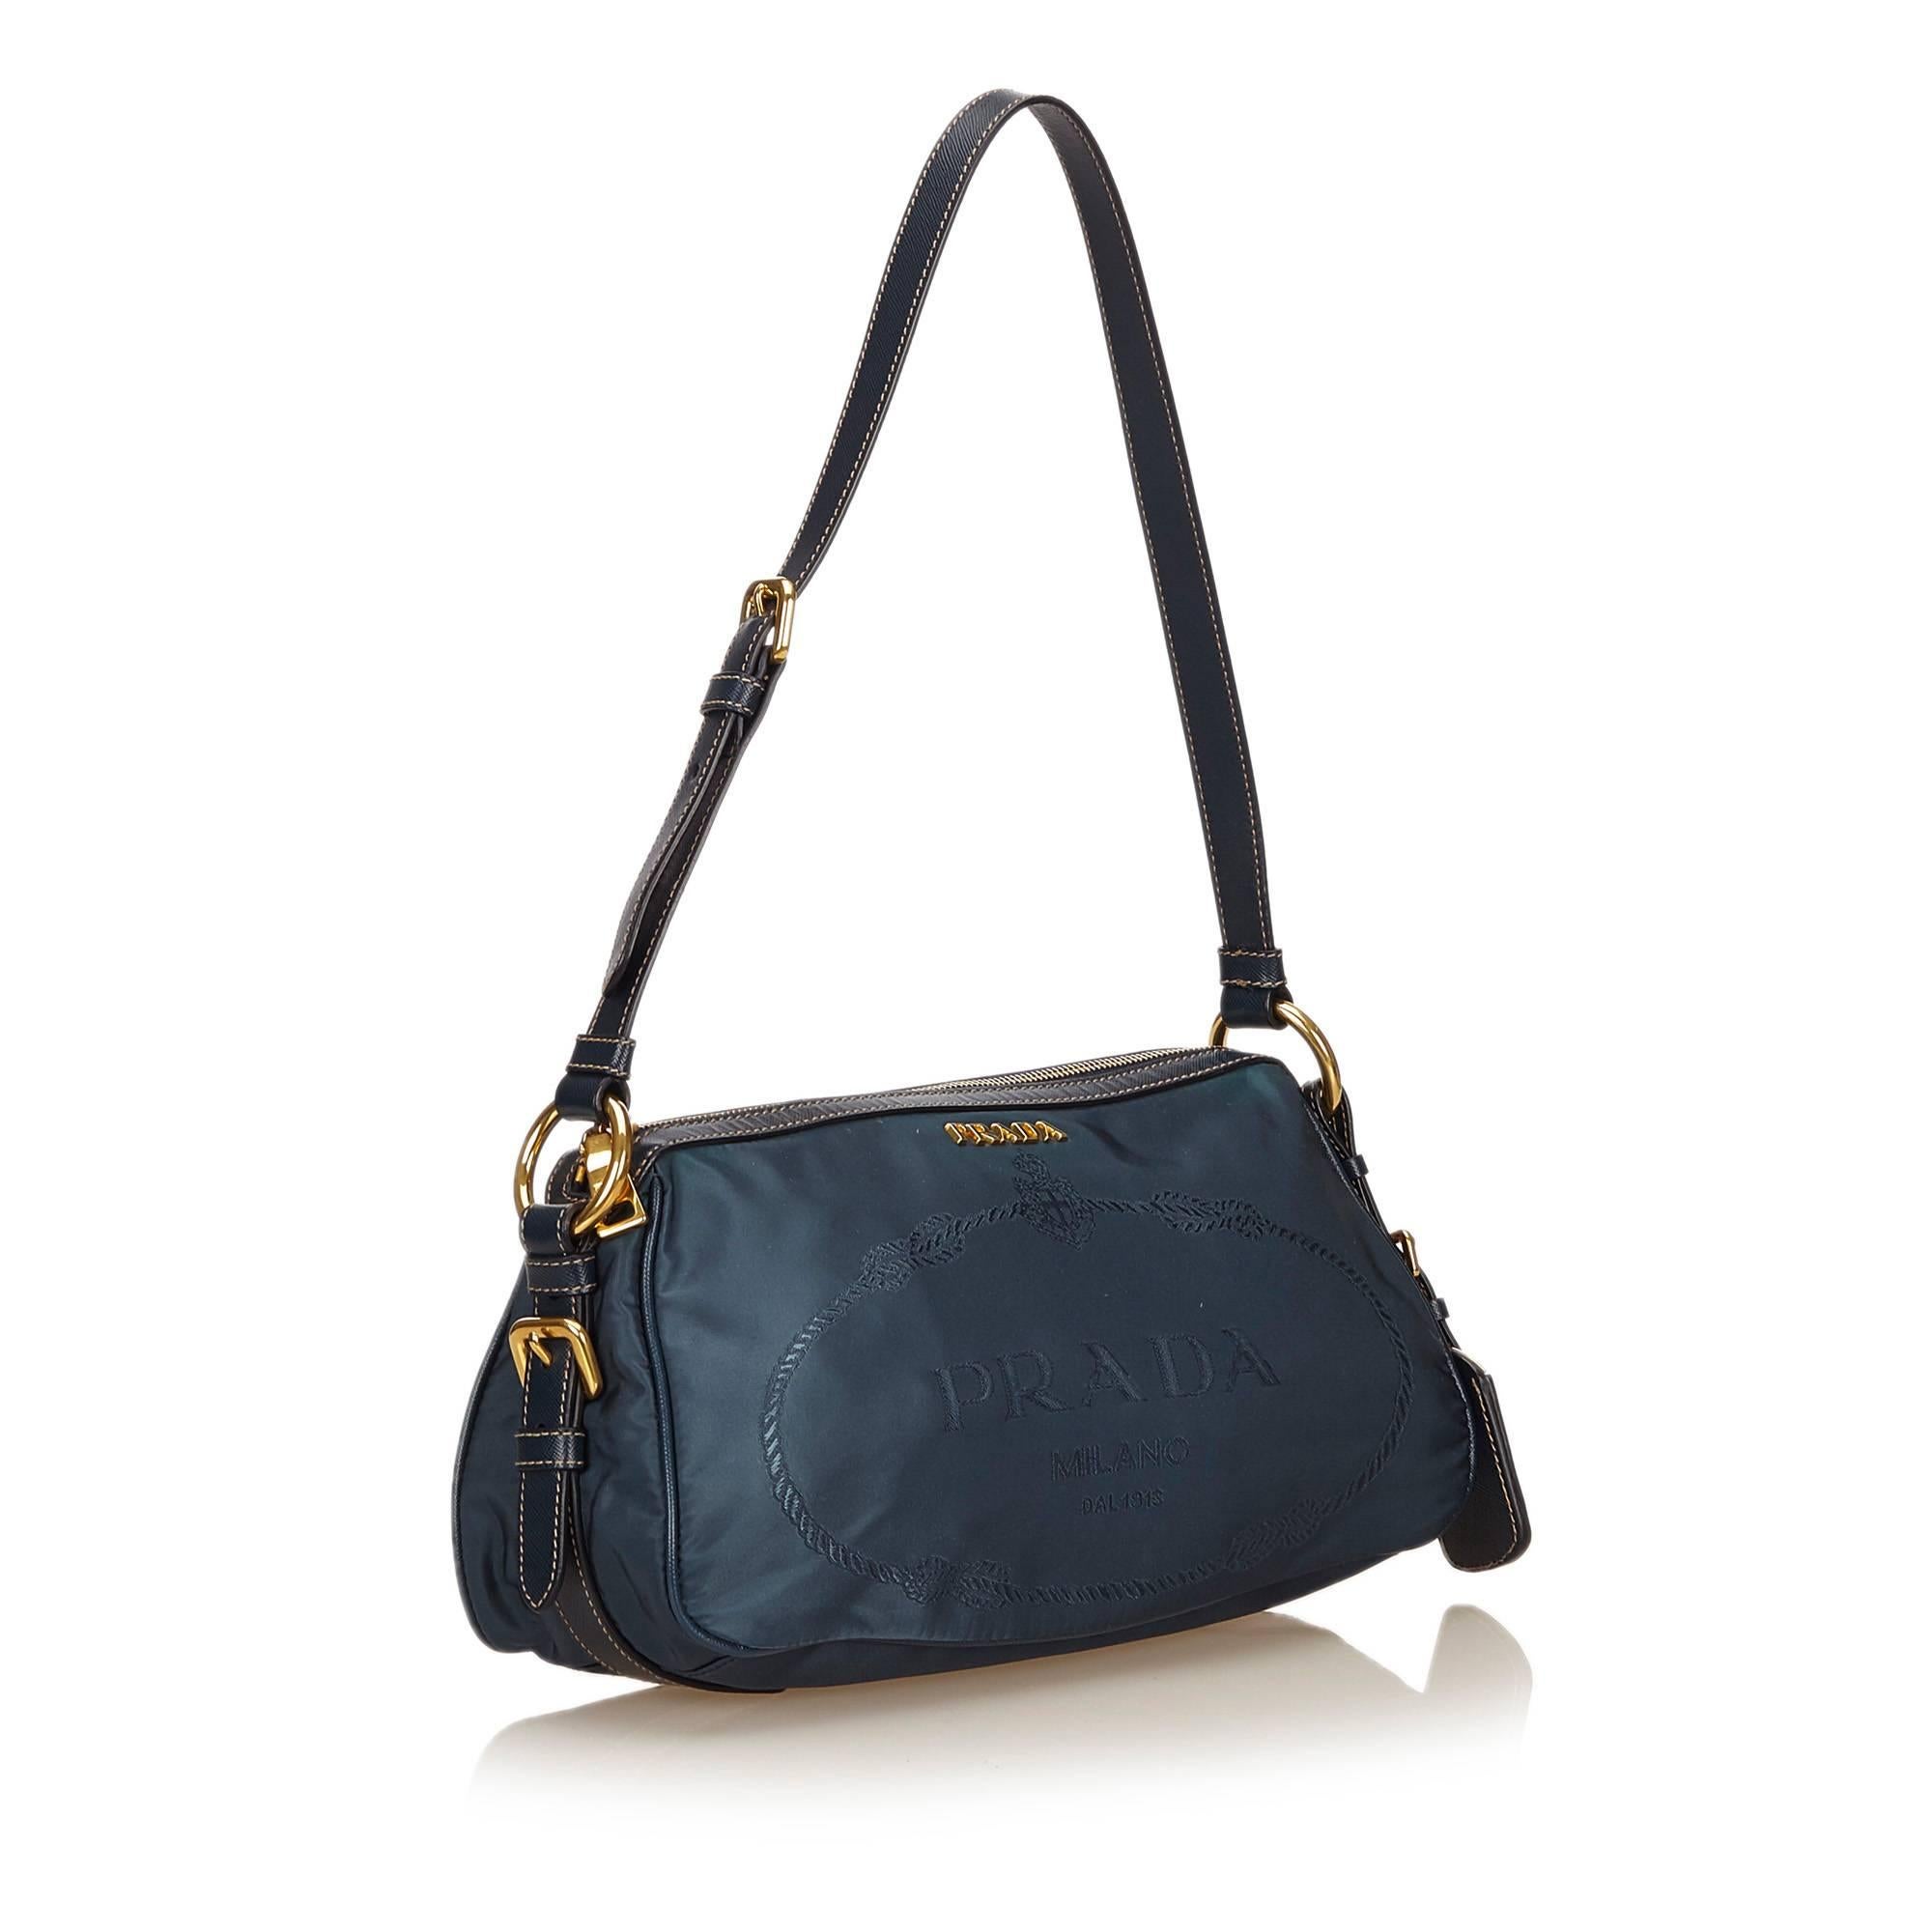 Product details:  Blue nylon shoulder bag by Prada.  Trimmed with leather.  Adjustable shoulder strap.  Top zip closure.  Lined interior with inner slide and zip pockets.  Goldtone hardware.  Authenticity card and dust bag included.  12